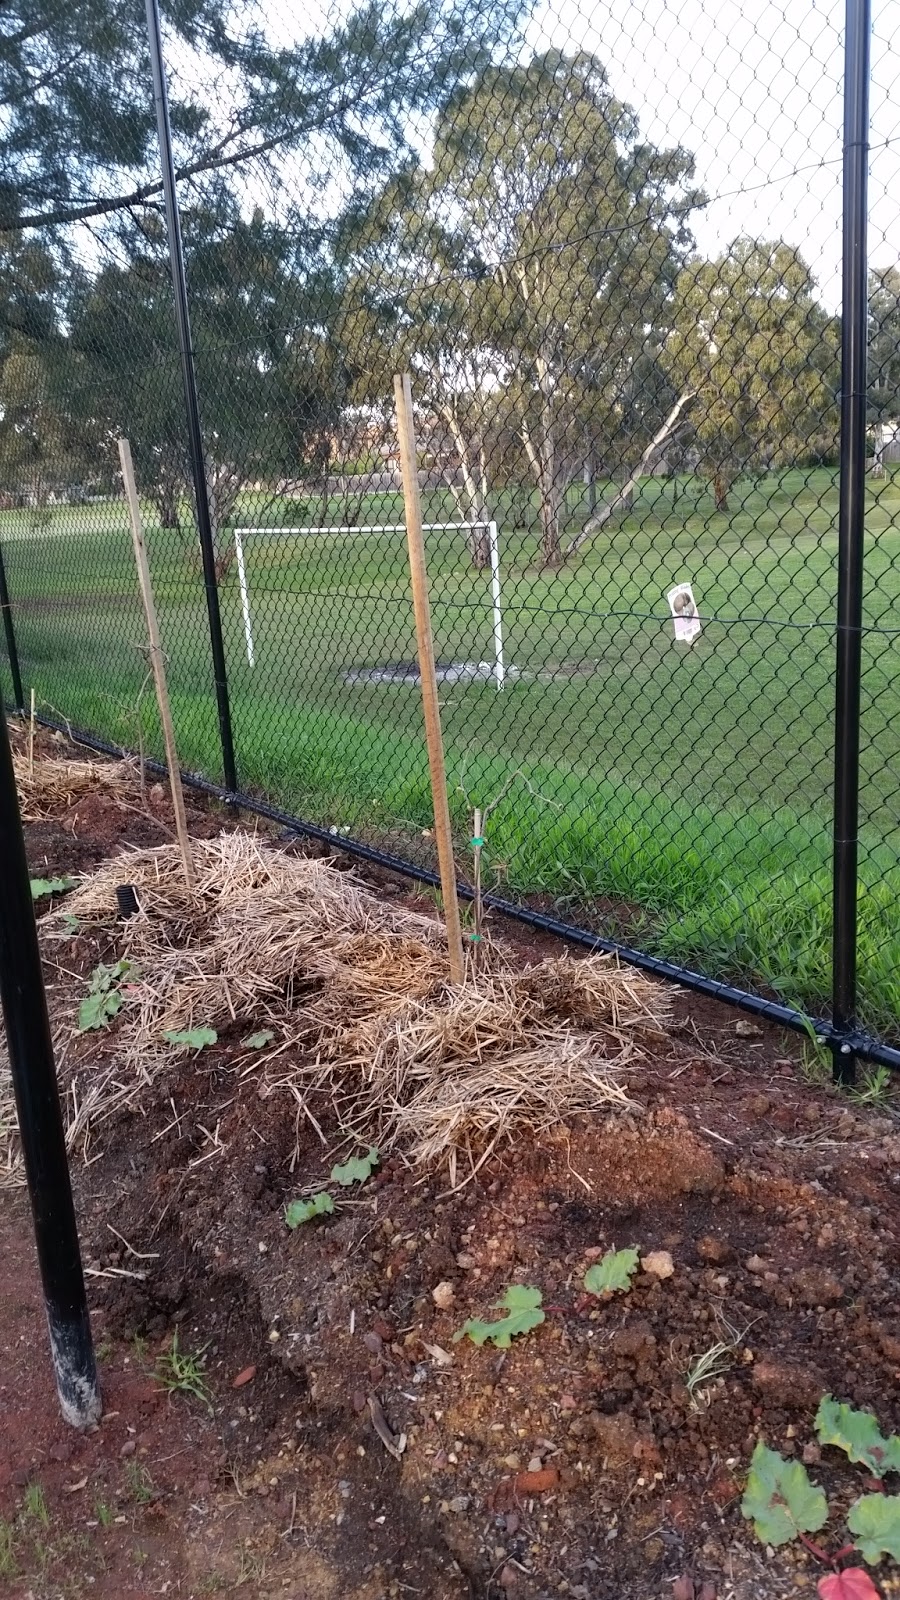 Macleod Organic Community Garden | Somers Avenue 500m north of May St c/o 18 May st for postal, Macleod VIC 3085, Australia | Phone: 0418 404 265